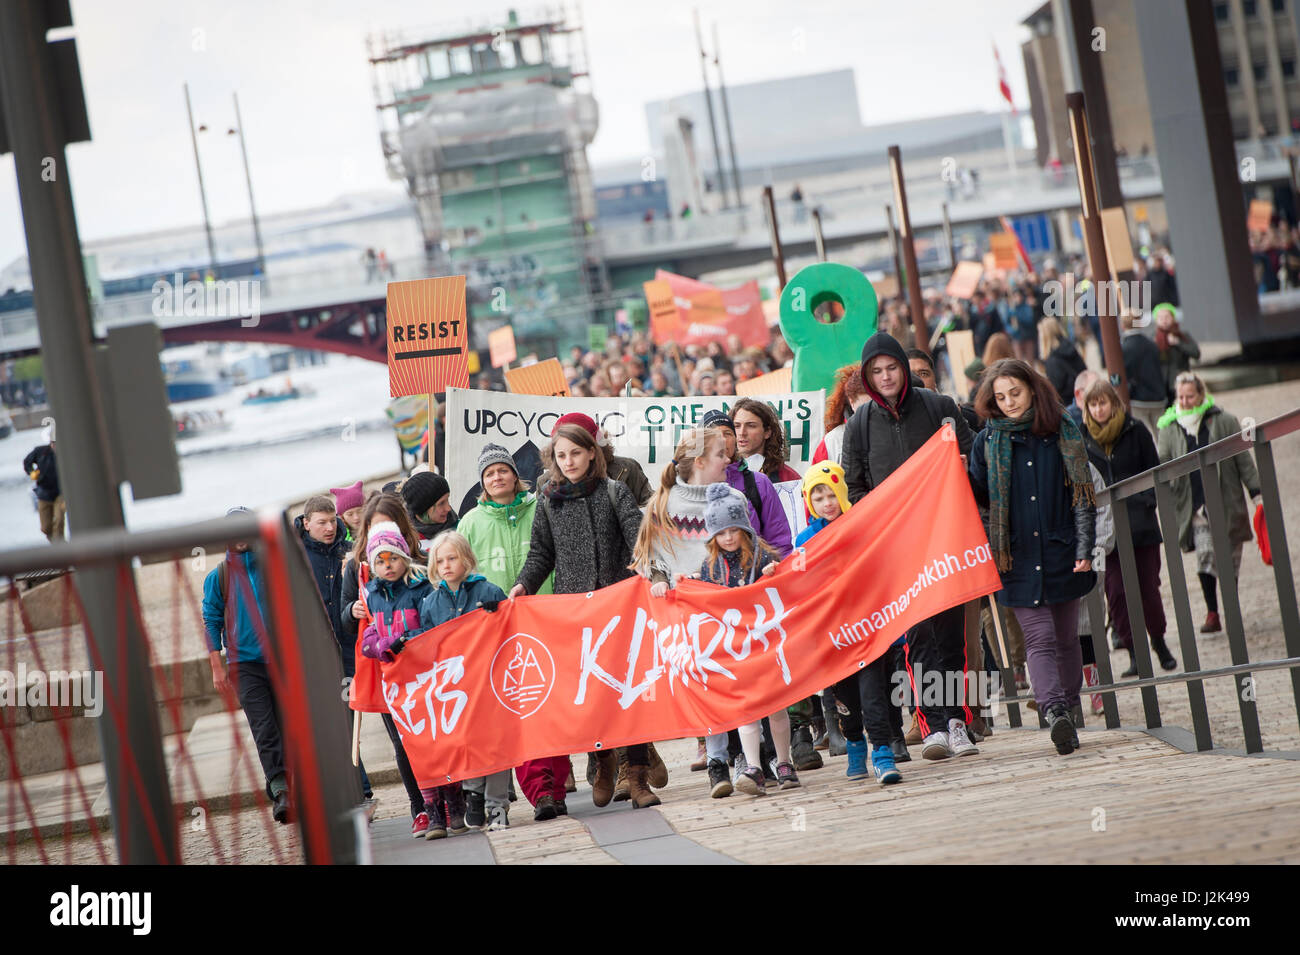 Copenhagen, Denmark, Saturday 29th April, 2017 More than 1700 people join an a climate change march in the Danish city of Copenhagen on Saturday. The march coincides with US President Donald Trump's first 100 days in office, and is part of a larger initiative happening in the United States under the title Climate March. The event in Denmark has been organised by a group calling themselves Folkets Klimamarch København (English: The People's Climate March Copenhagen) Credit: Matthew James Harrison/Alamy Live News Stock Photo